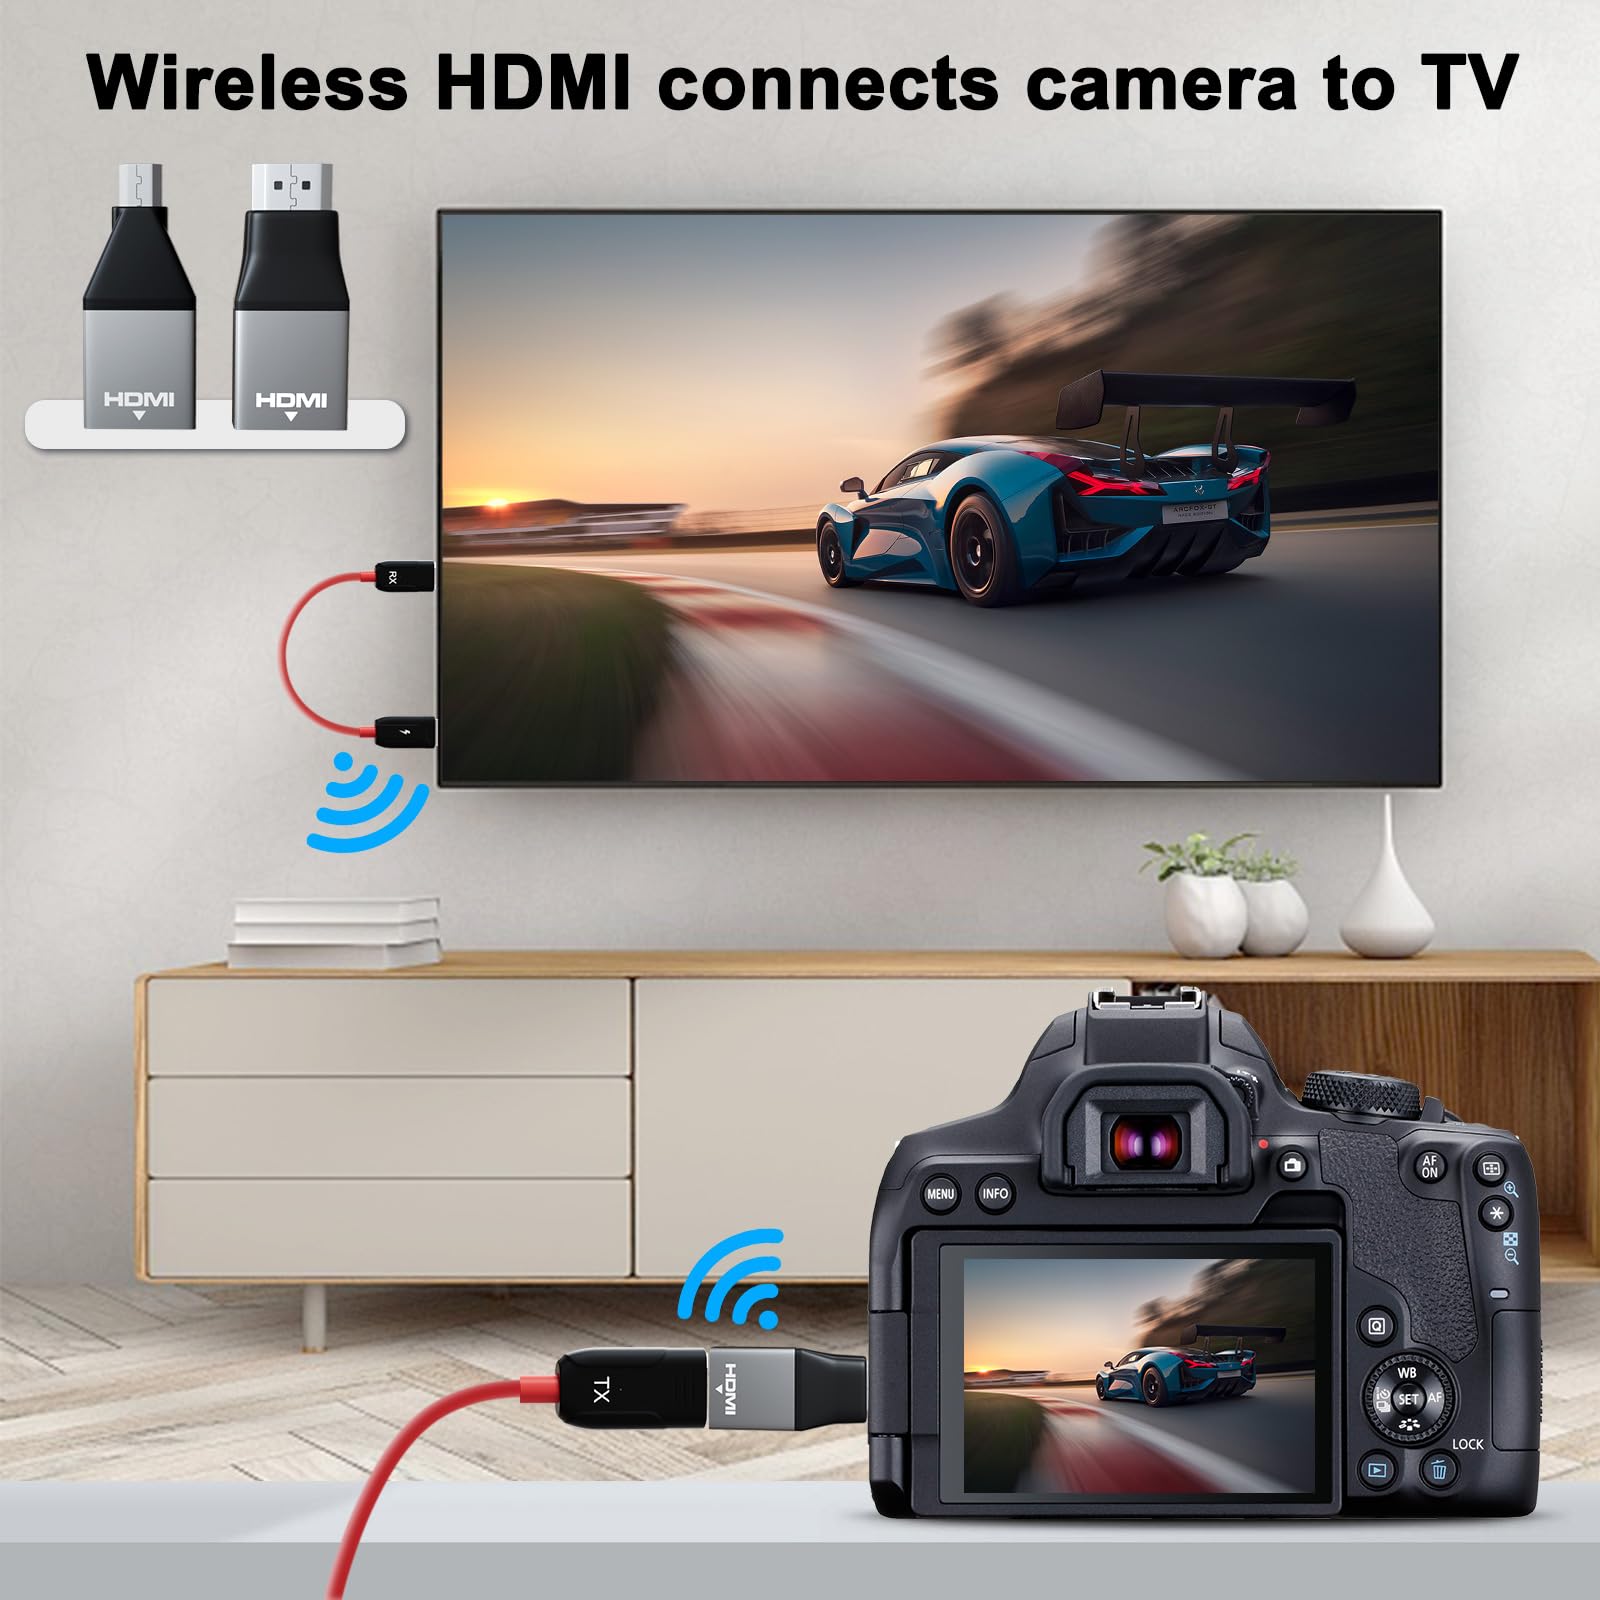 Wireless HDMI Transmitter and Receiver,Portable Wireless HDMI Extender Kit,Plug&Play,5GHz 1080P 60fps Video Audio Projection for Laptop,PC,Camera to HDTV/Projector